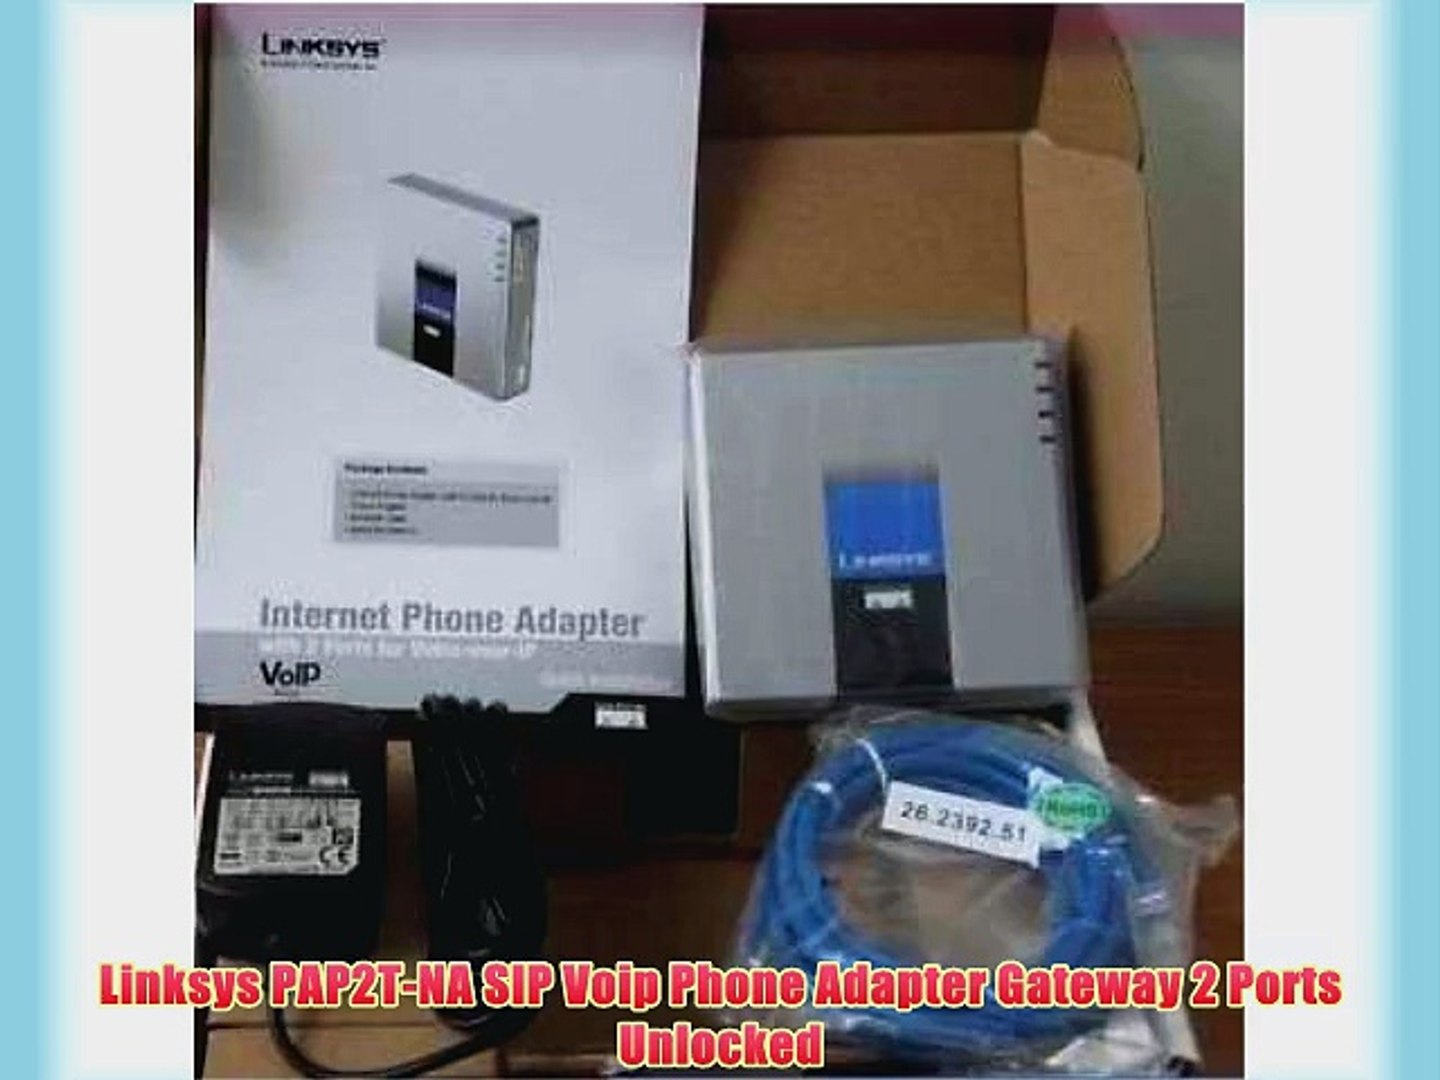 Linksys PAP2T-NA SIP Voip Phone Adapter Gateway 2 Ports Unlocked - video  Dailymotion